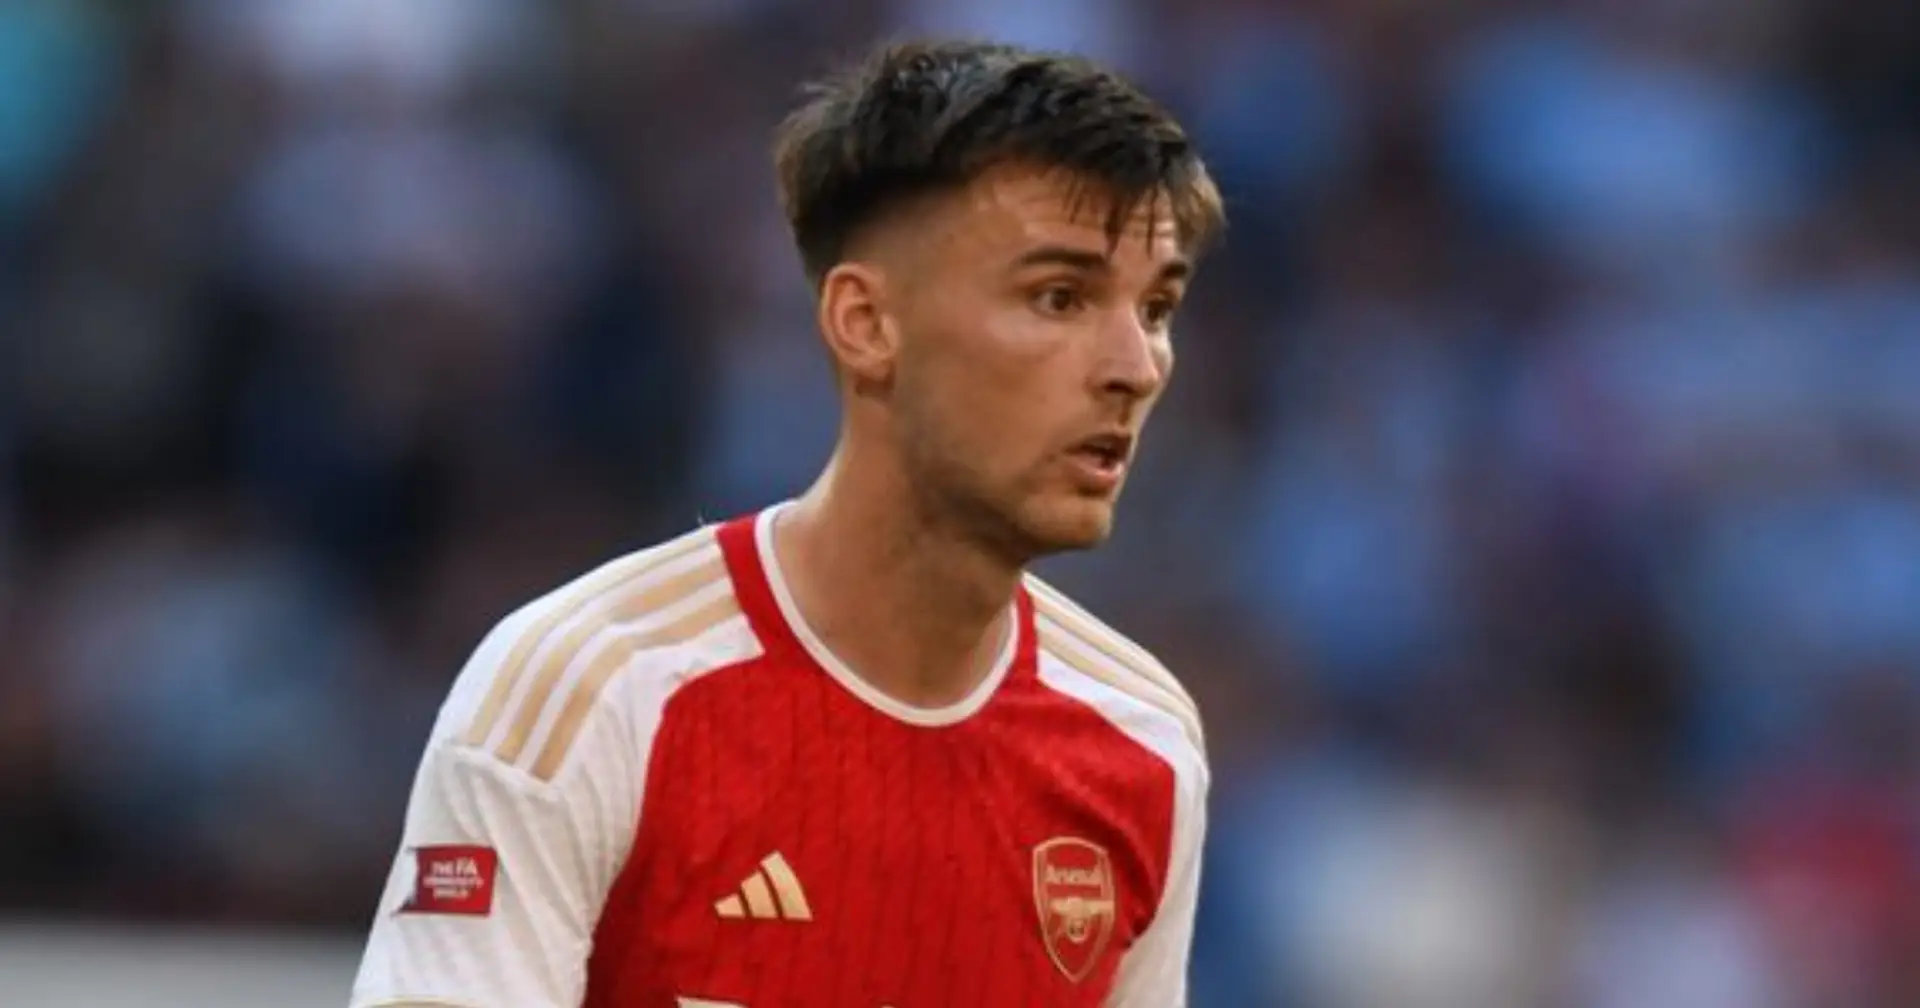 Explained: Why Kieran Tierney was not part of squad vs Crystal Palace despite being fit